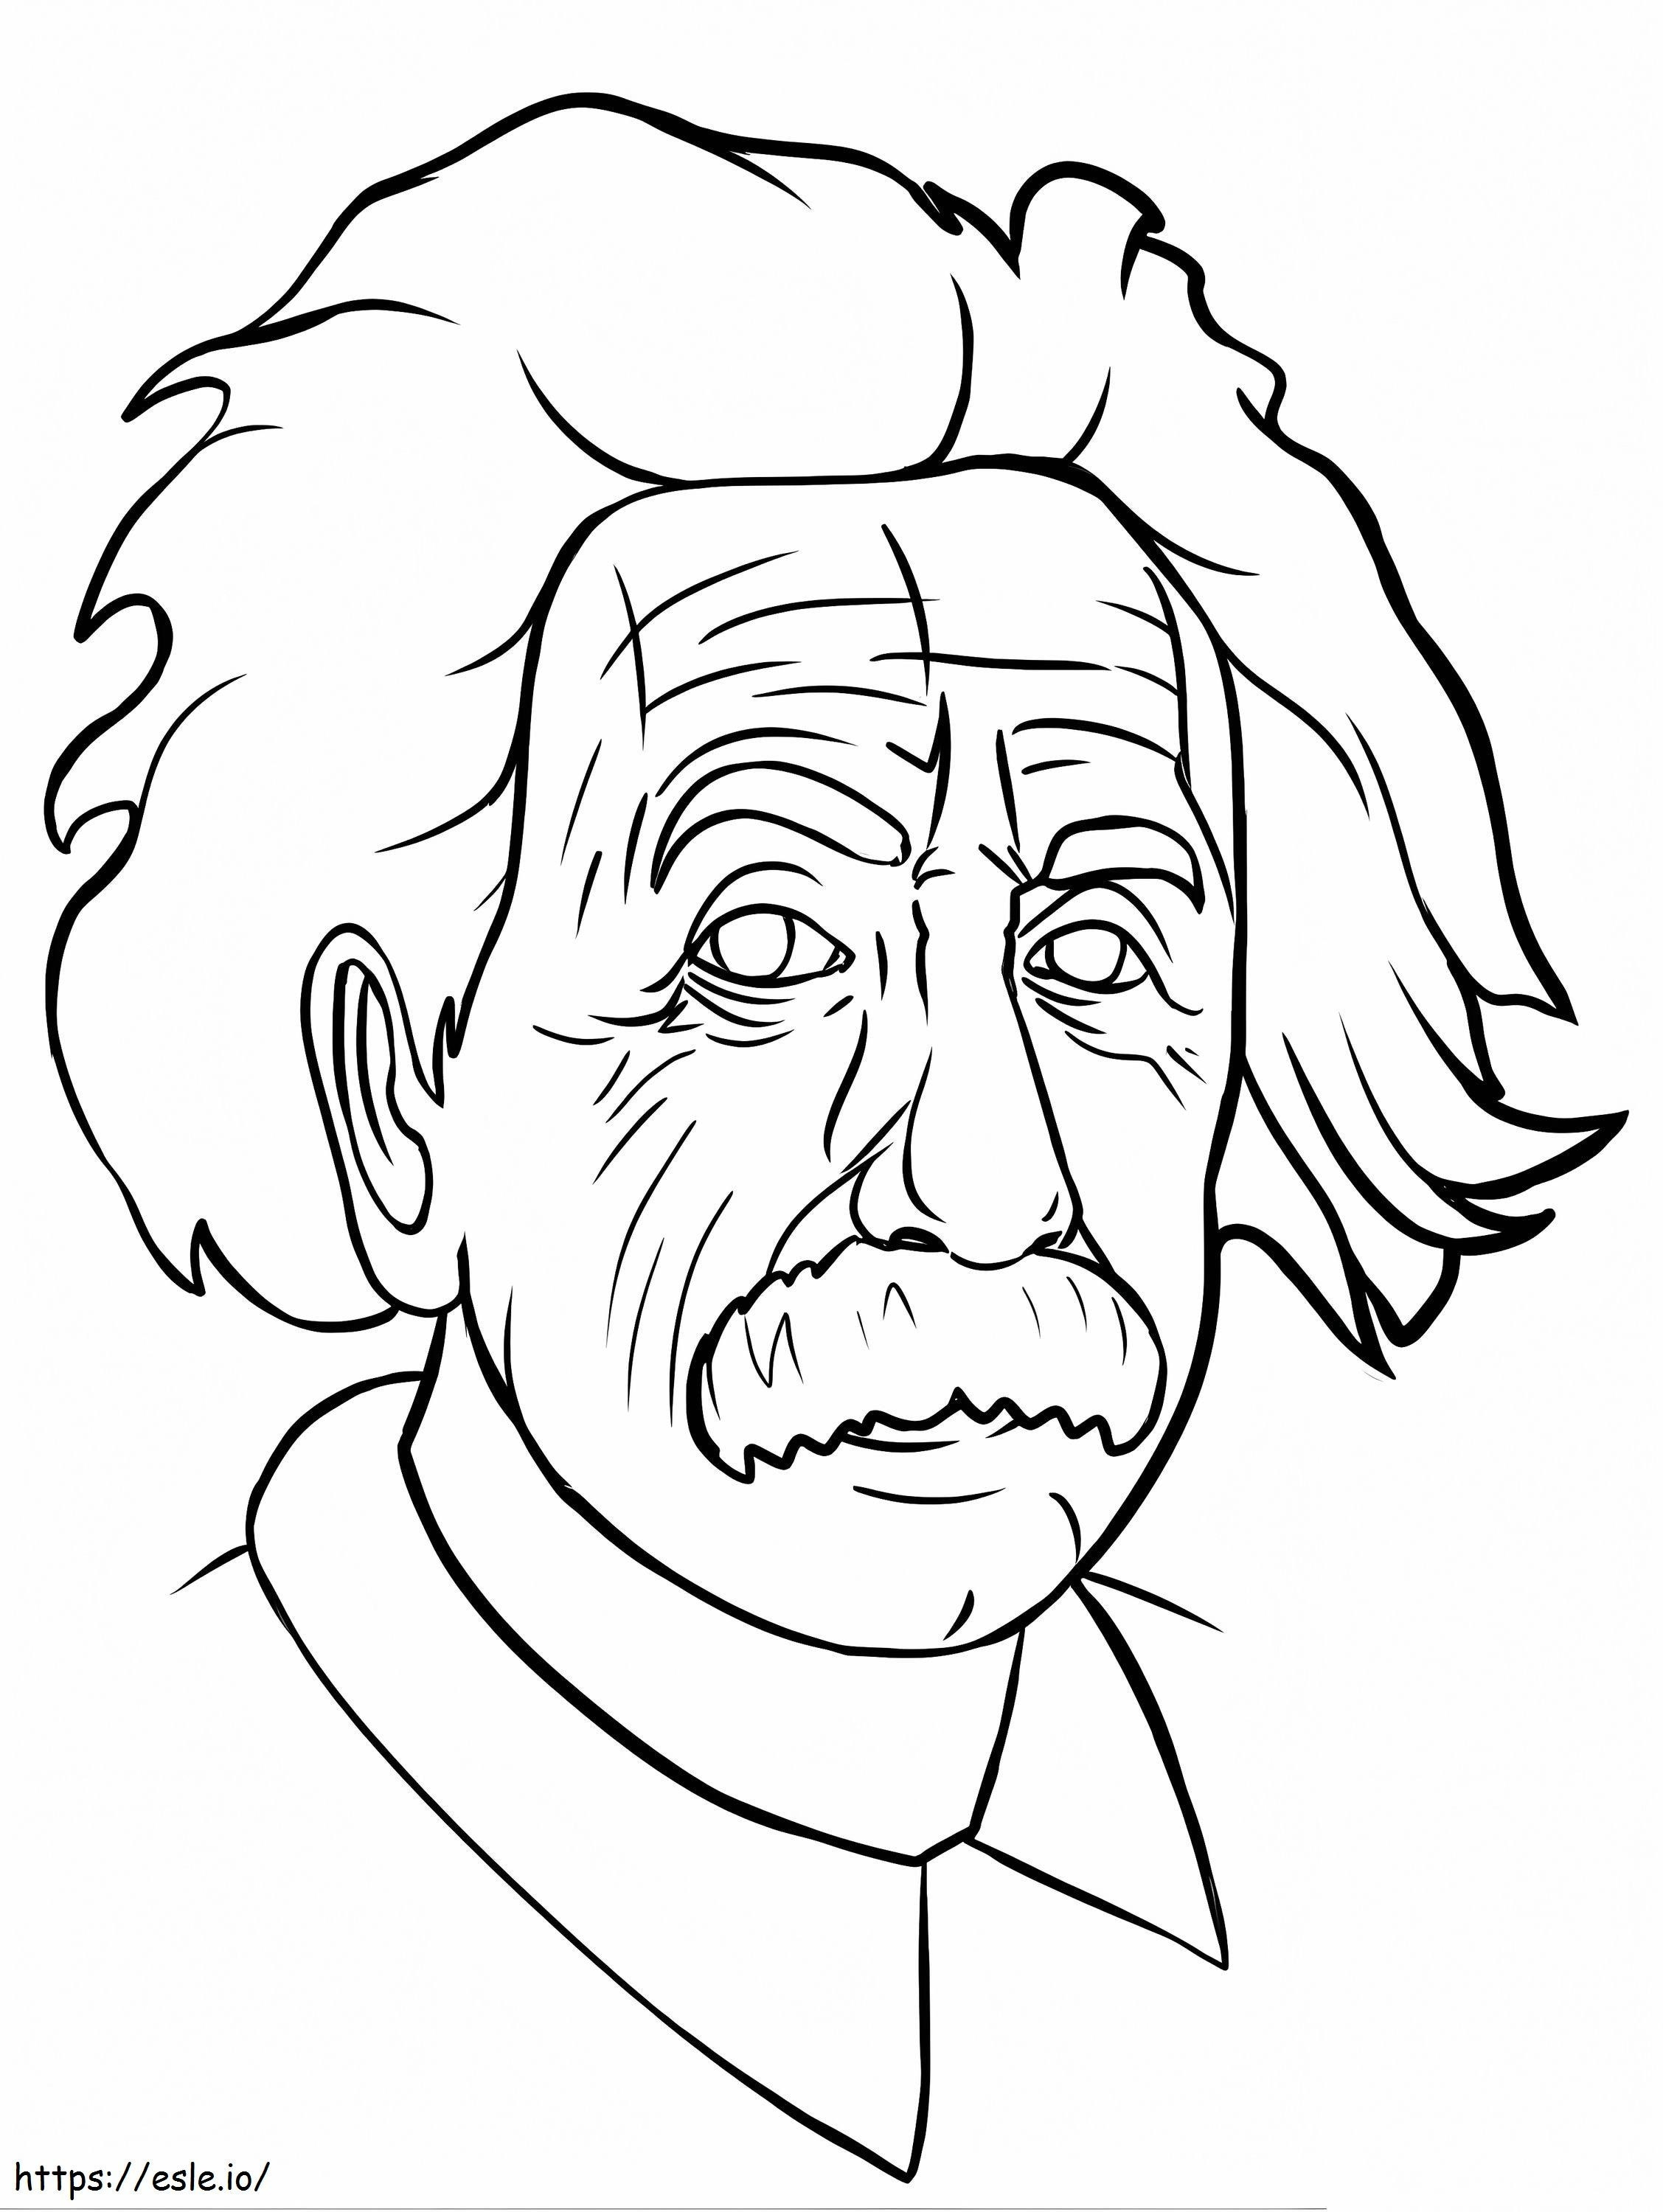 Einsteins Face coloring page